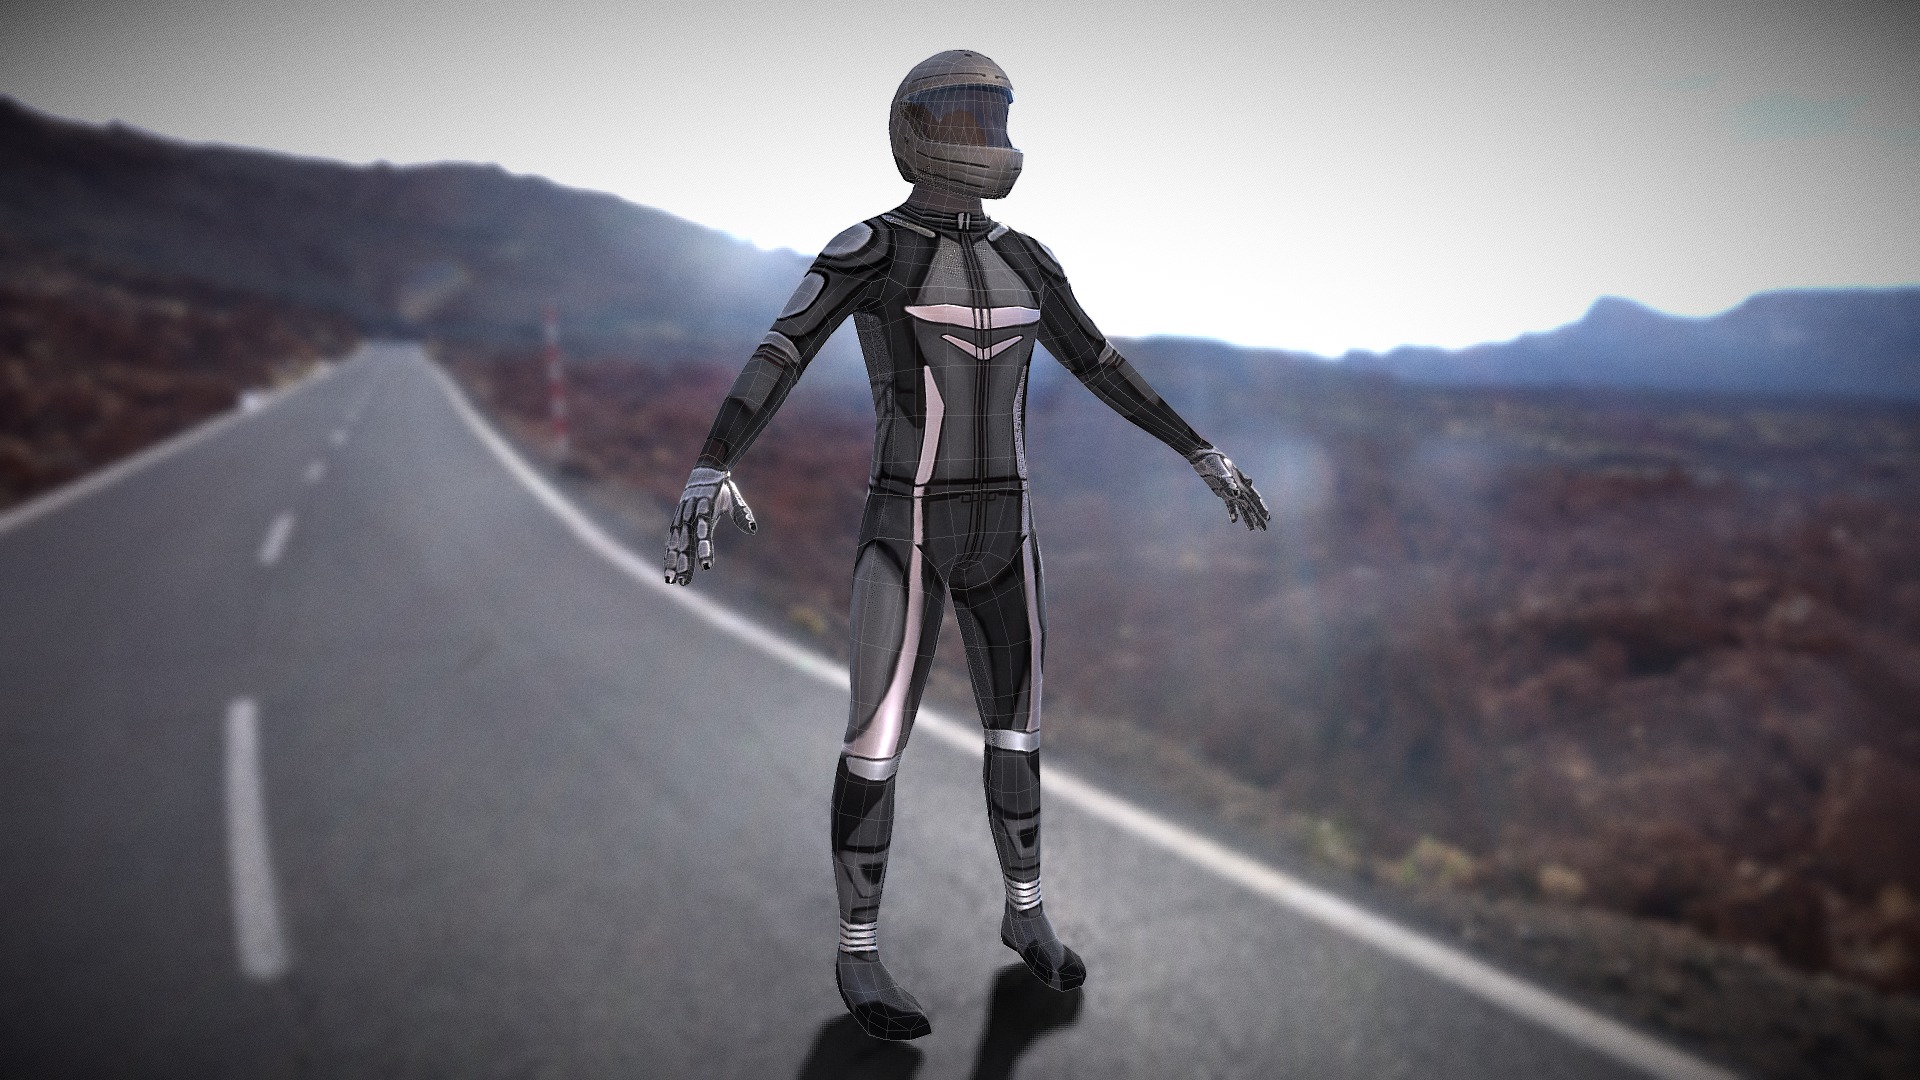 3D model Low-Poly Motorcyclist - This is a 3D model of the Low-Poly Motorcyclist. The 3D model is about a man in a garment walking on a road.